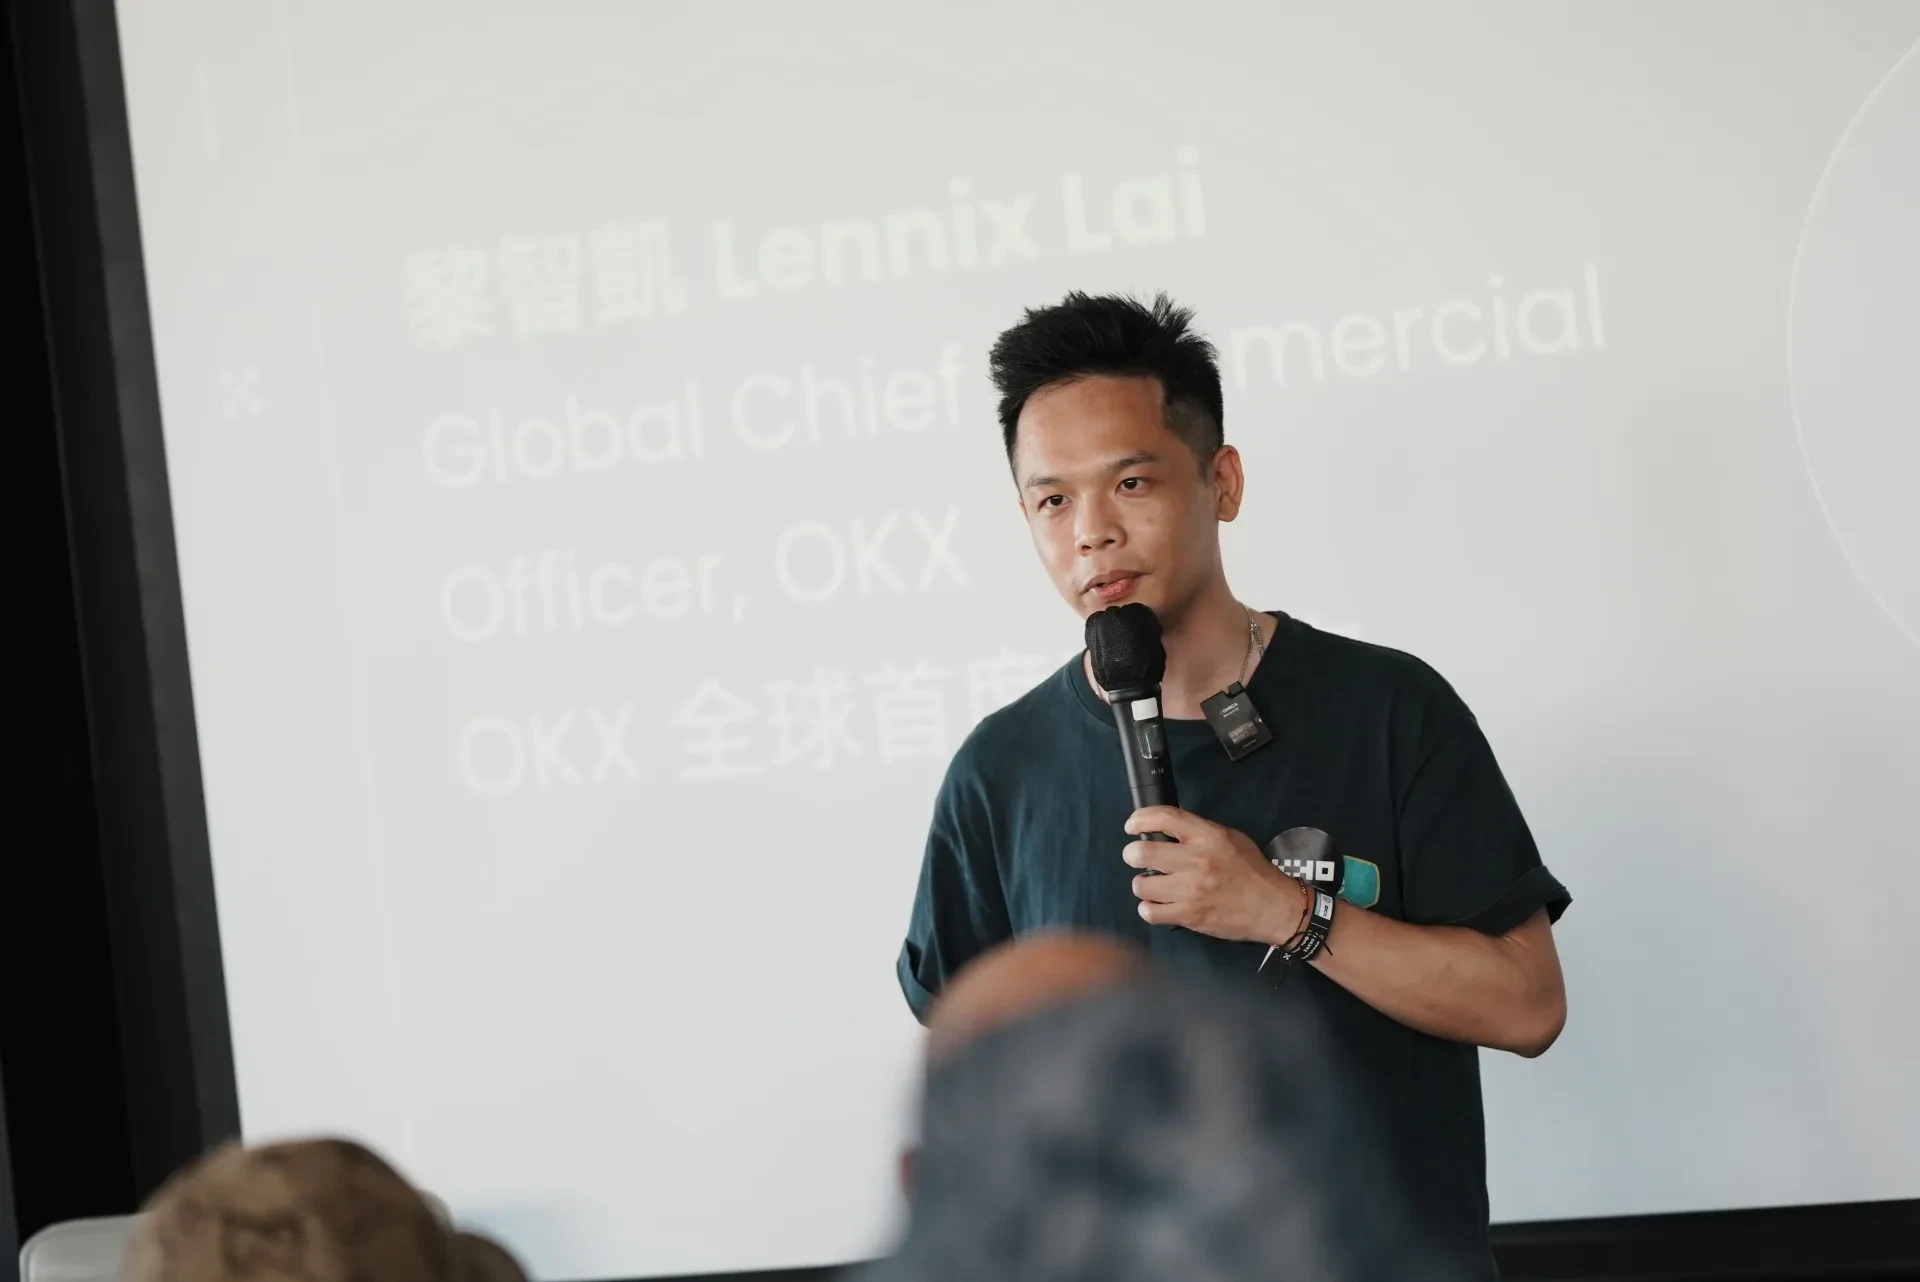 OKX Global Chief Commercial Officer Lennix Lai talking about the partnership with Manchester City